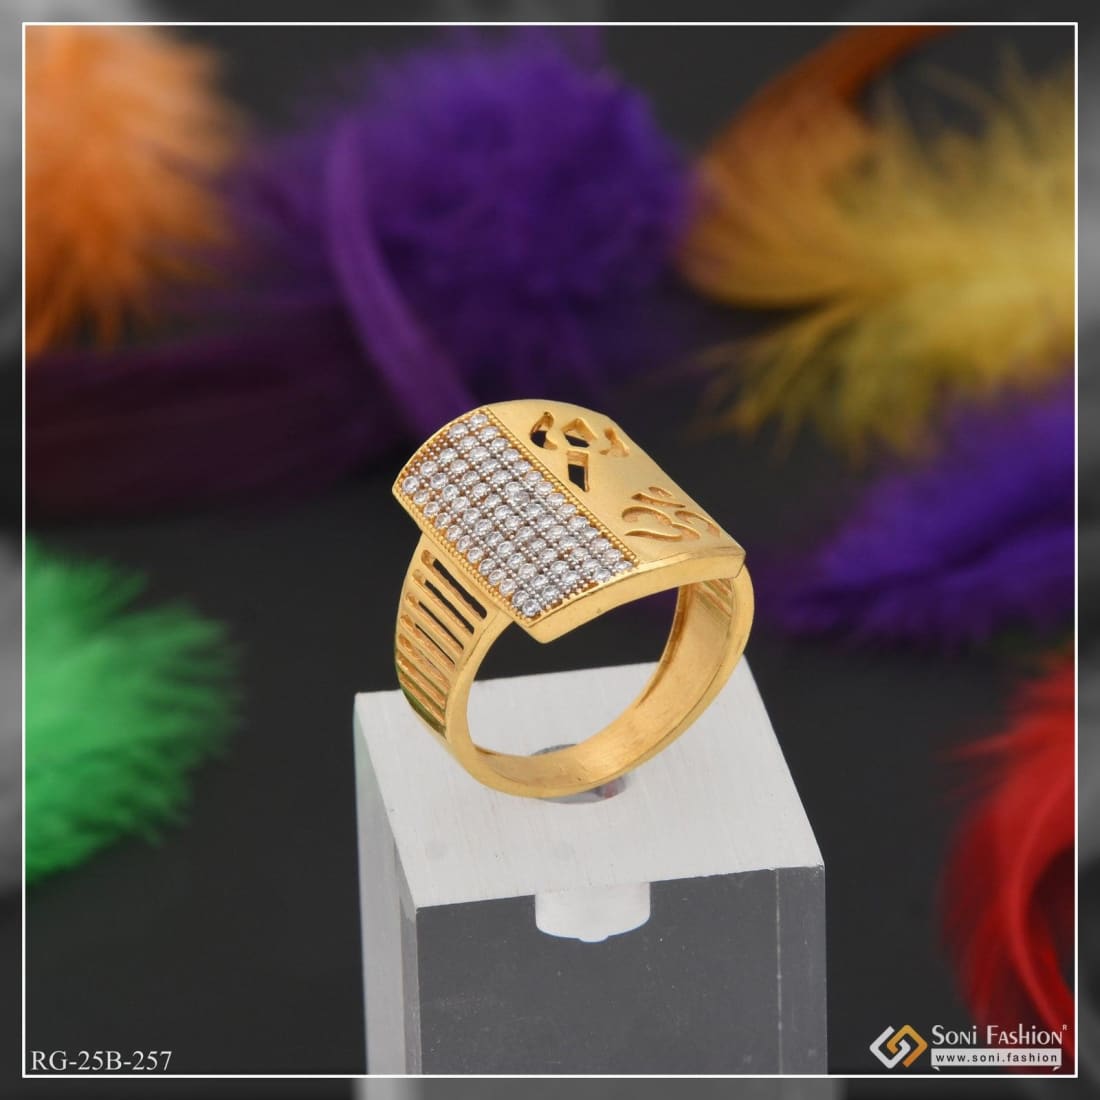 1 Gram Gold Plated Hand-crafted Delicate Design Ring For Men - Style B302  at Rs 1550.00 | Gold Plated Rings | ID: 2850866000248